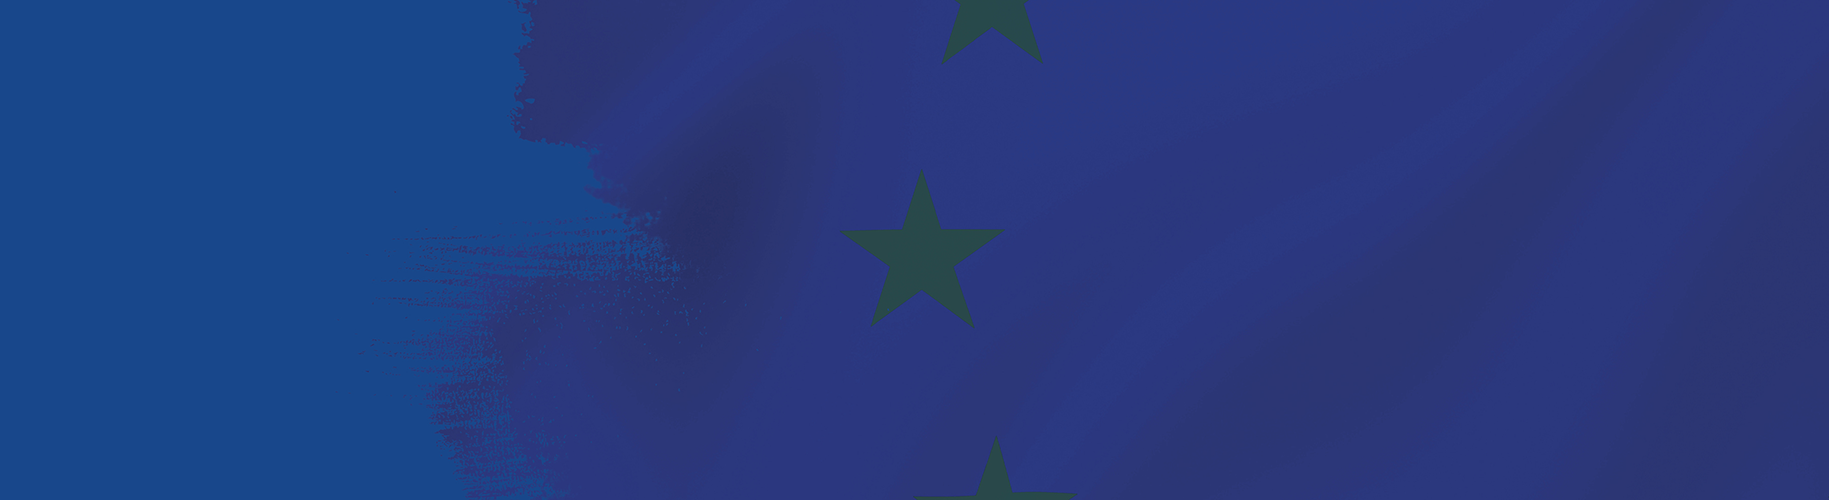 FutureProofBanner_1829x500.png